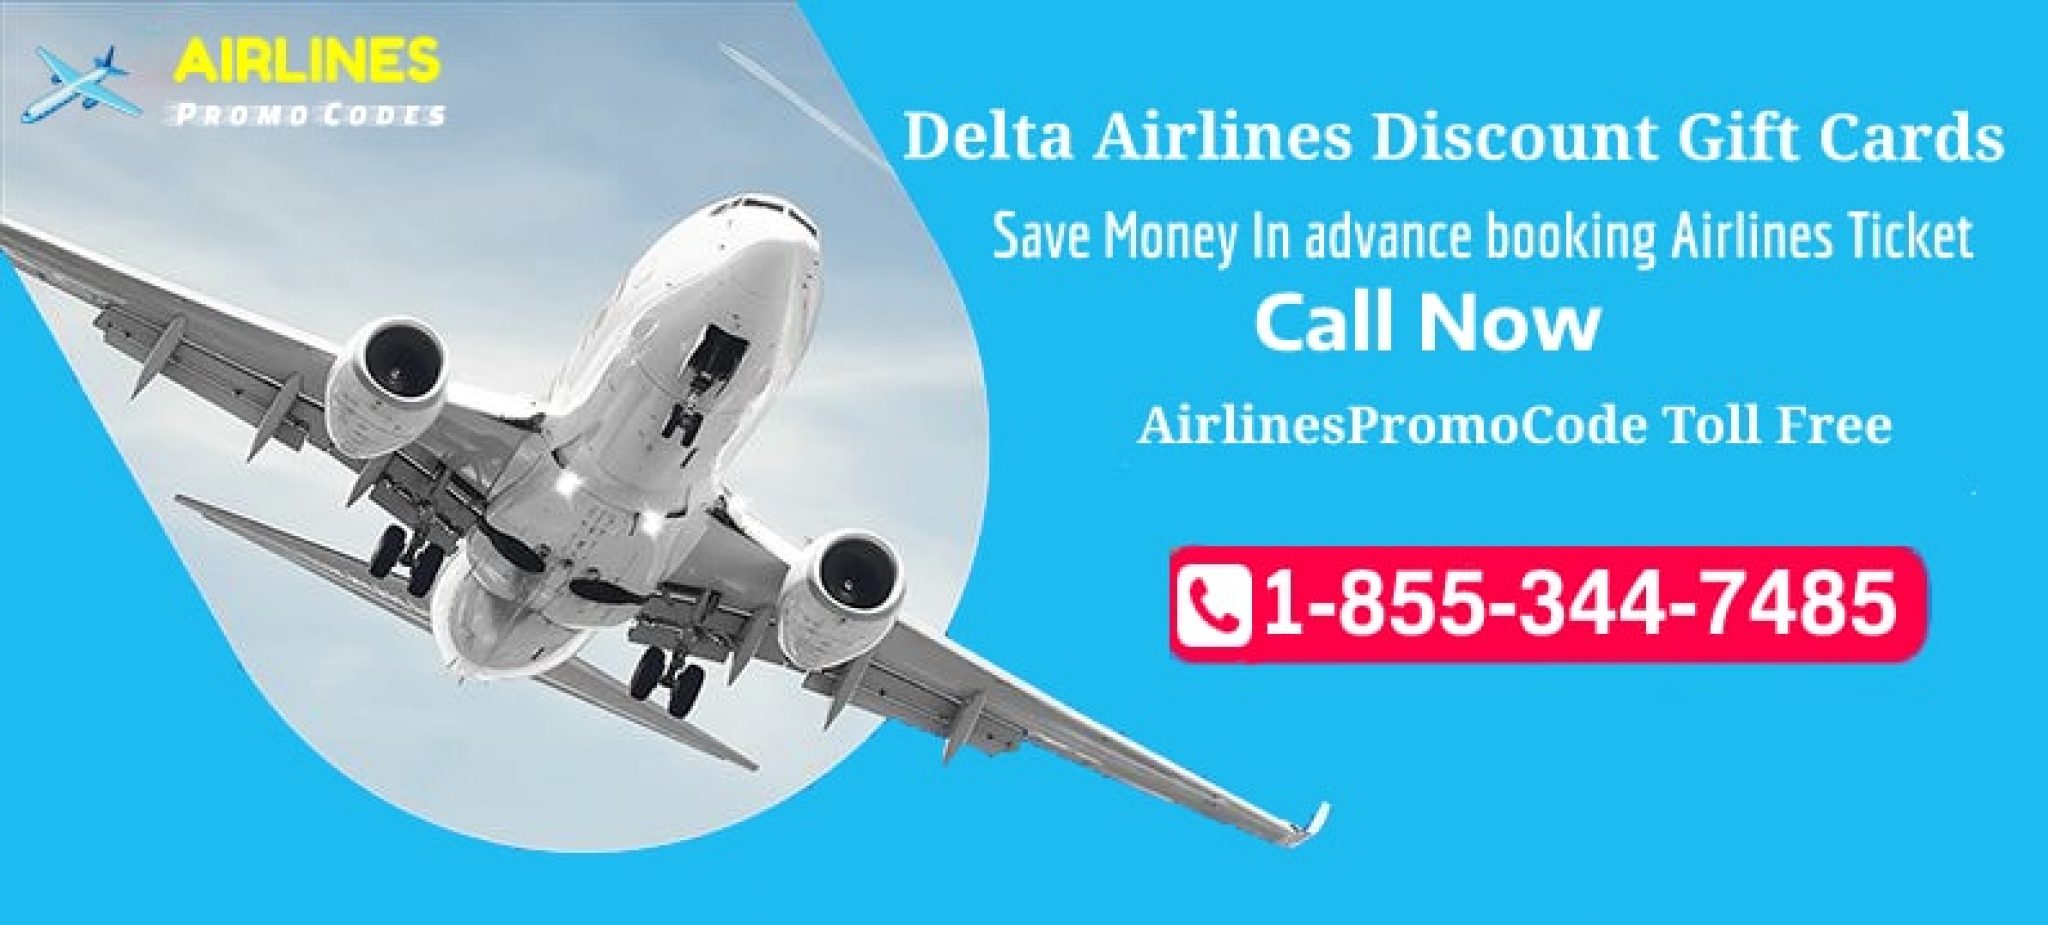 delta-airlines-gift-card-discounts-deals-promo-codes-coupons